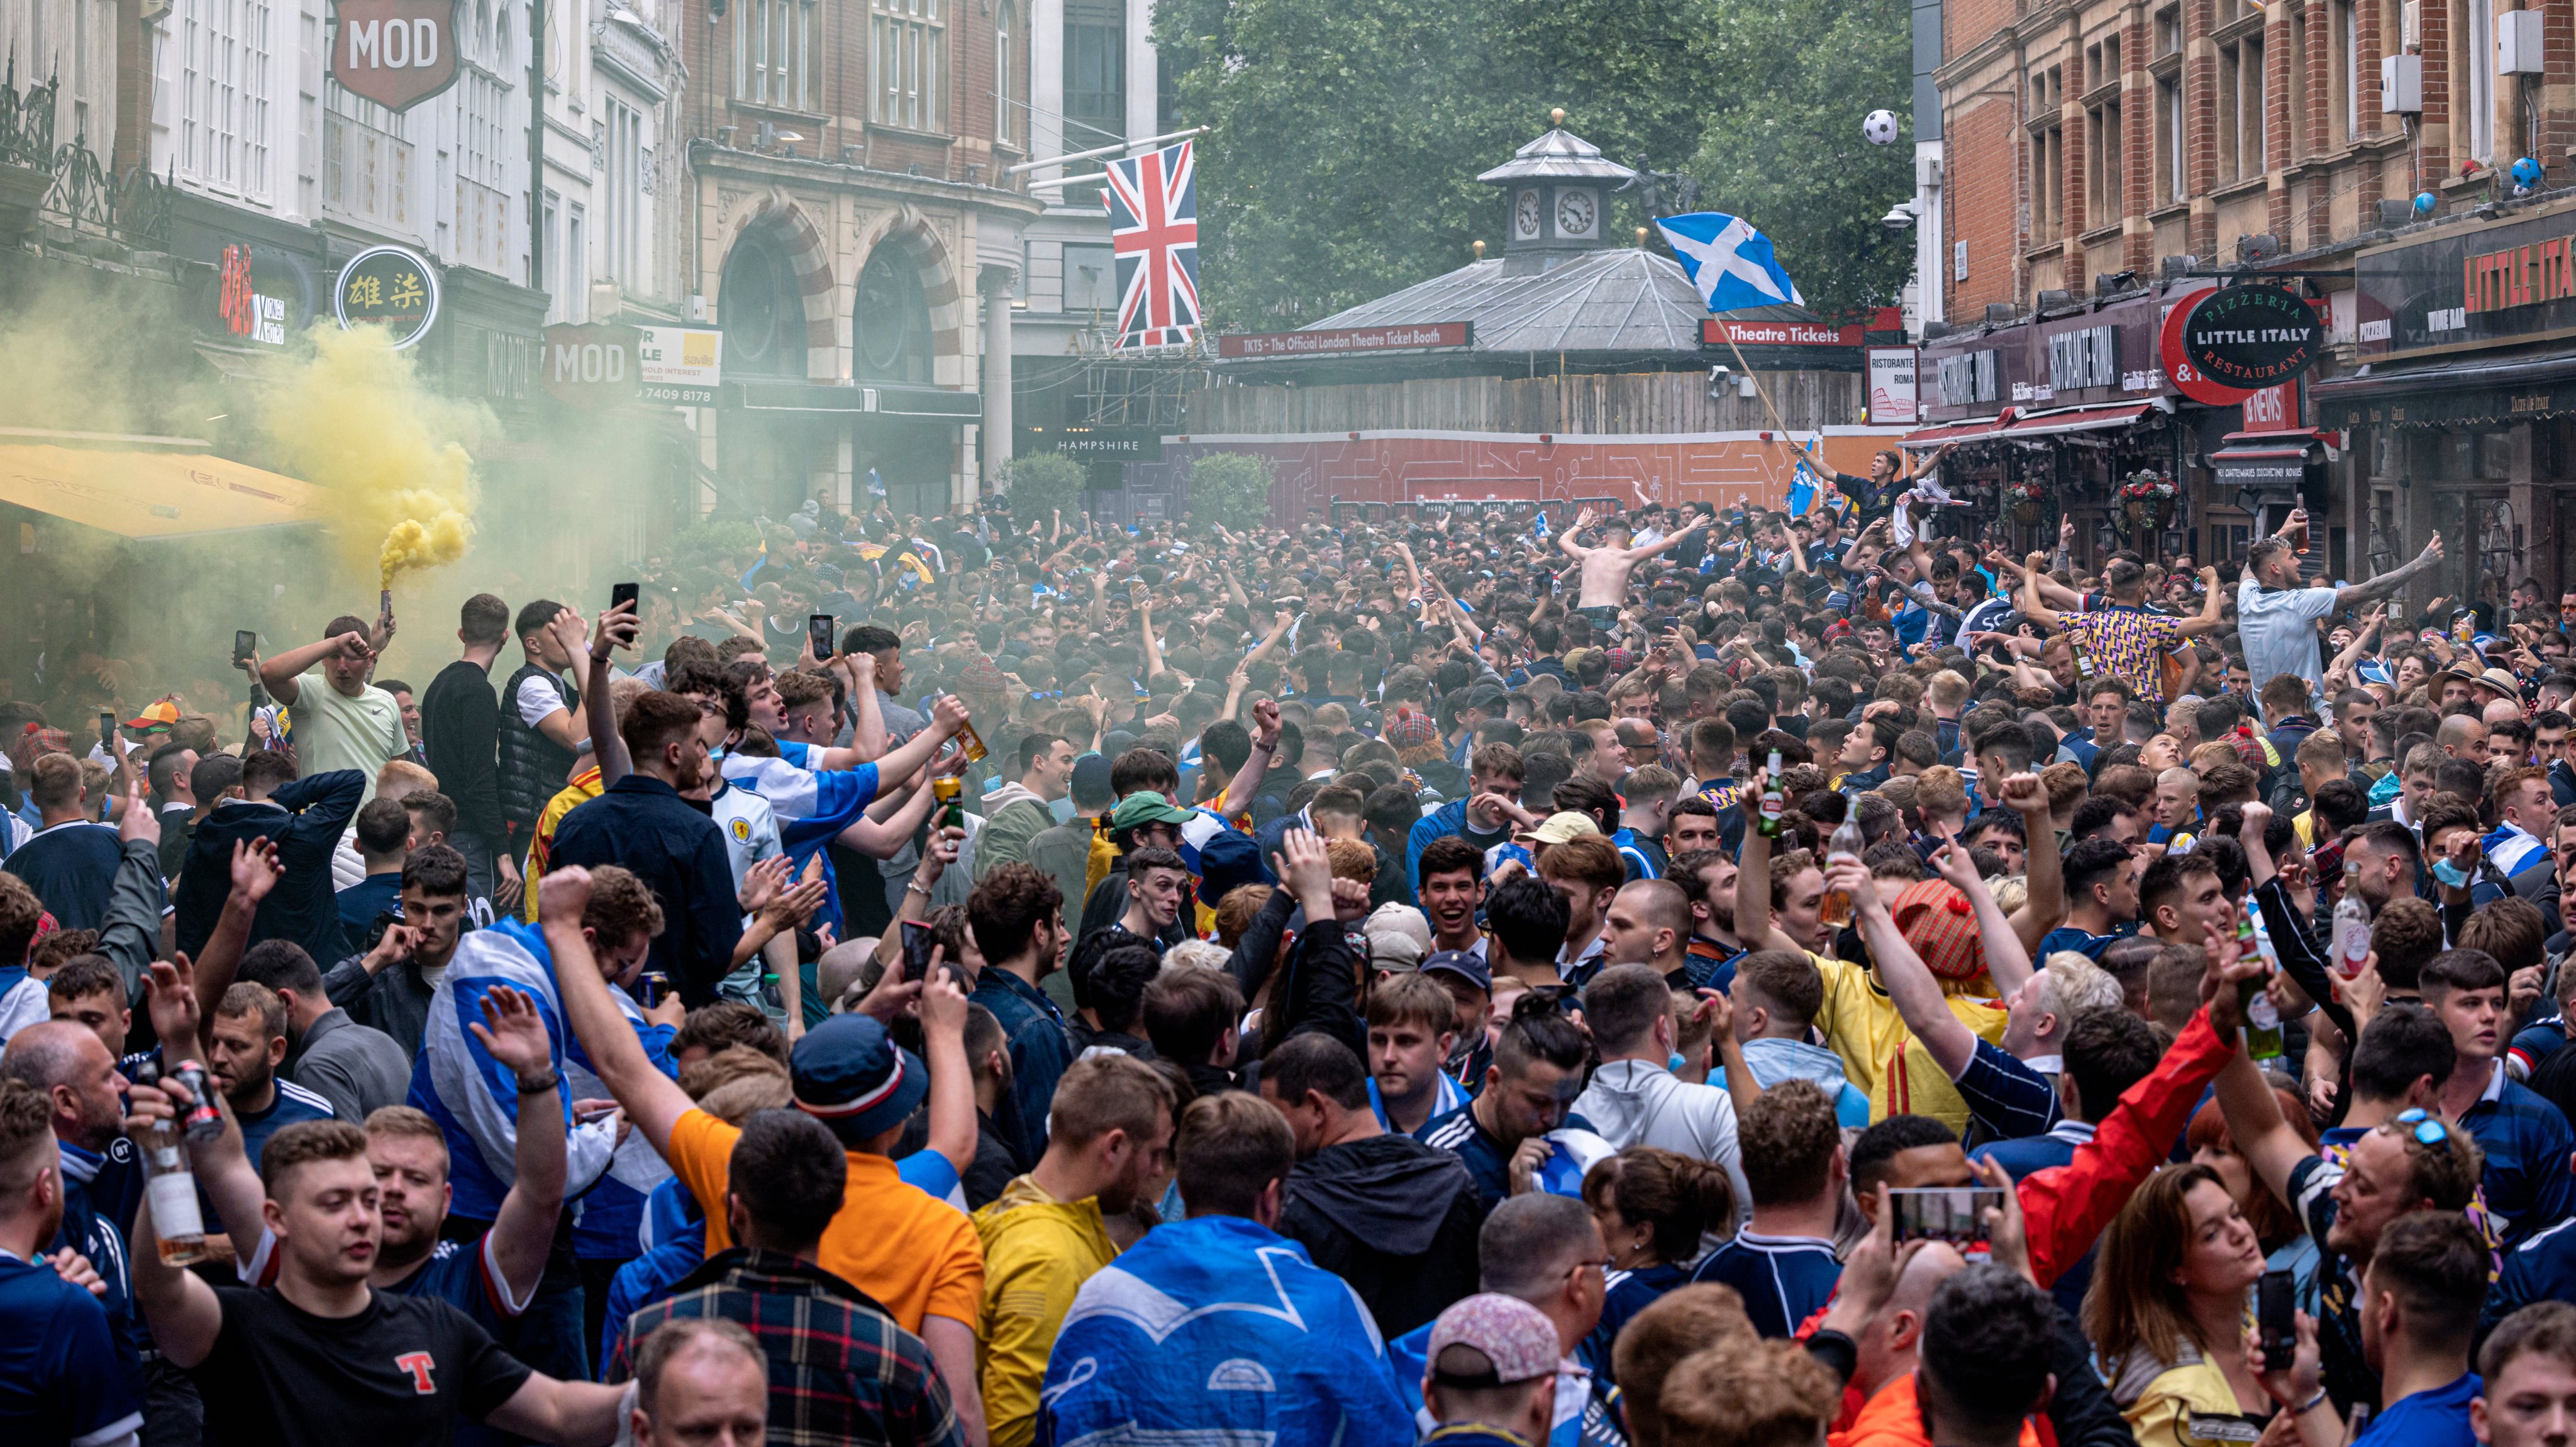 Scotland Football Fans Support Their Team In Euro 2020 Game Against England